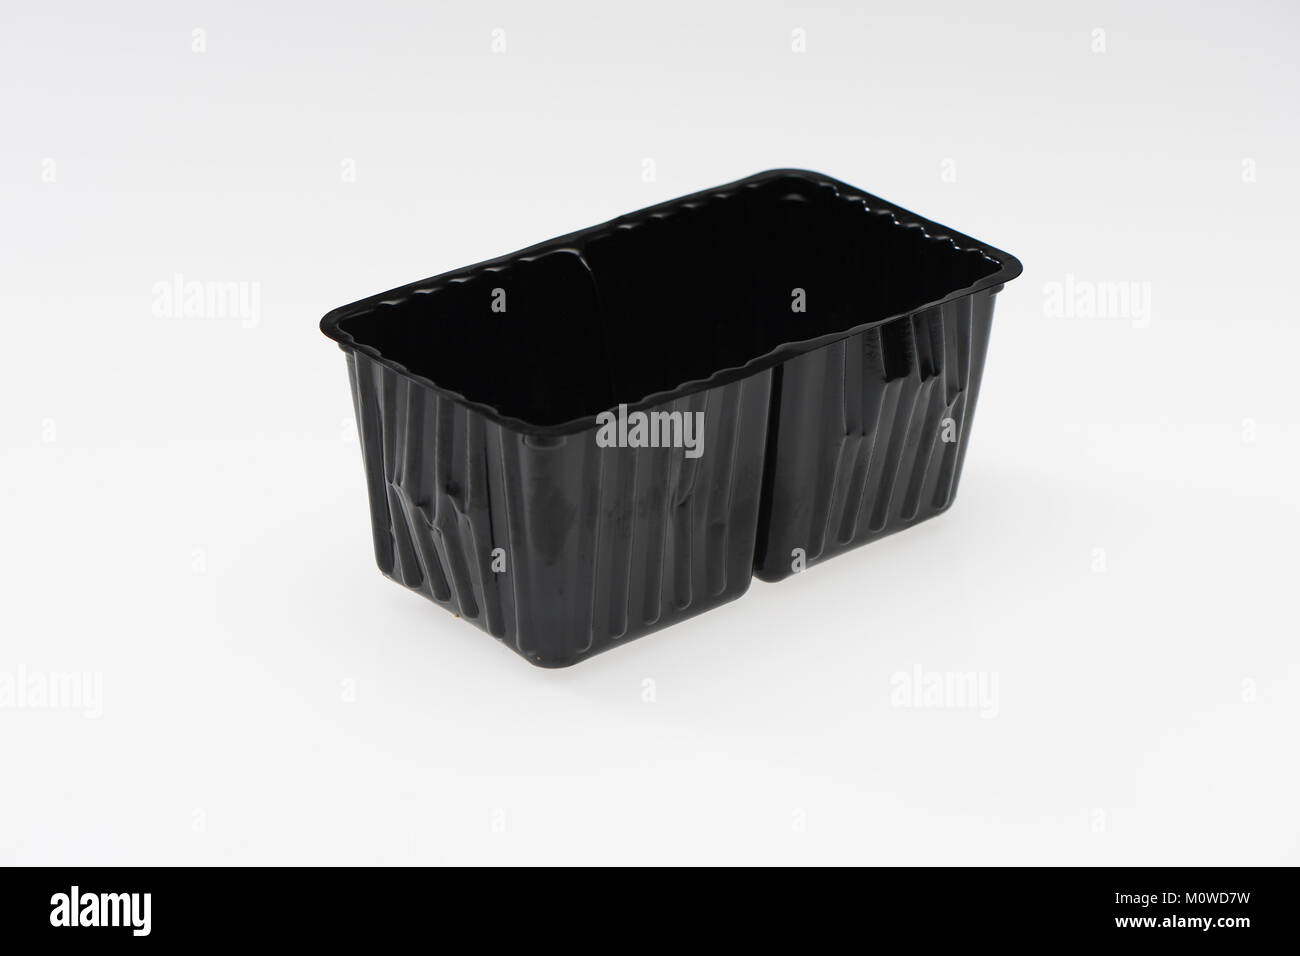 A black single use plastic food container ready for recycling on a white background. Stock Photo